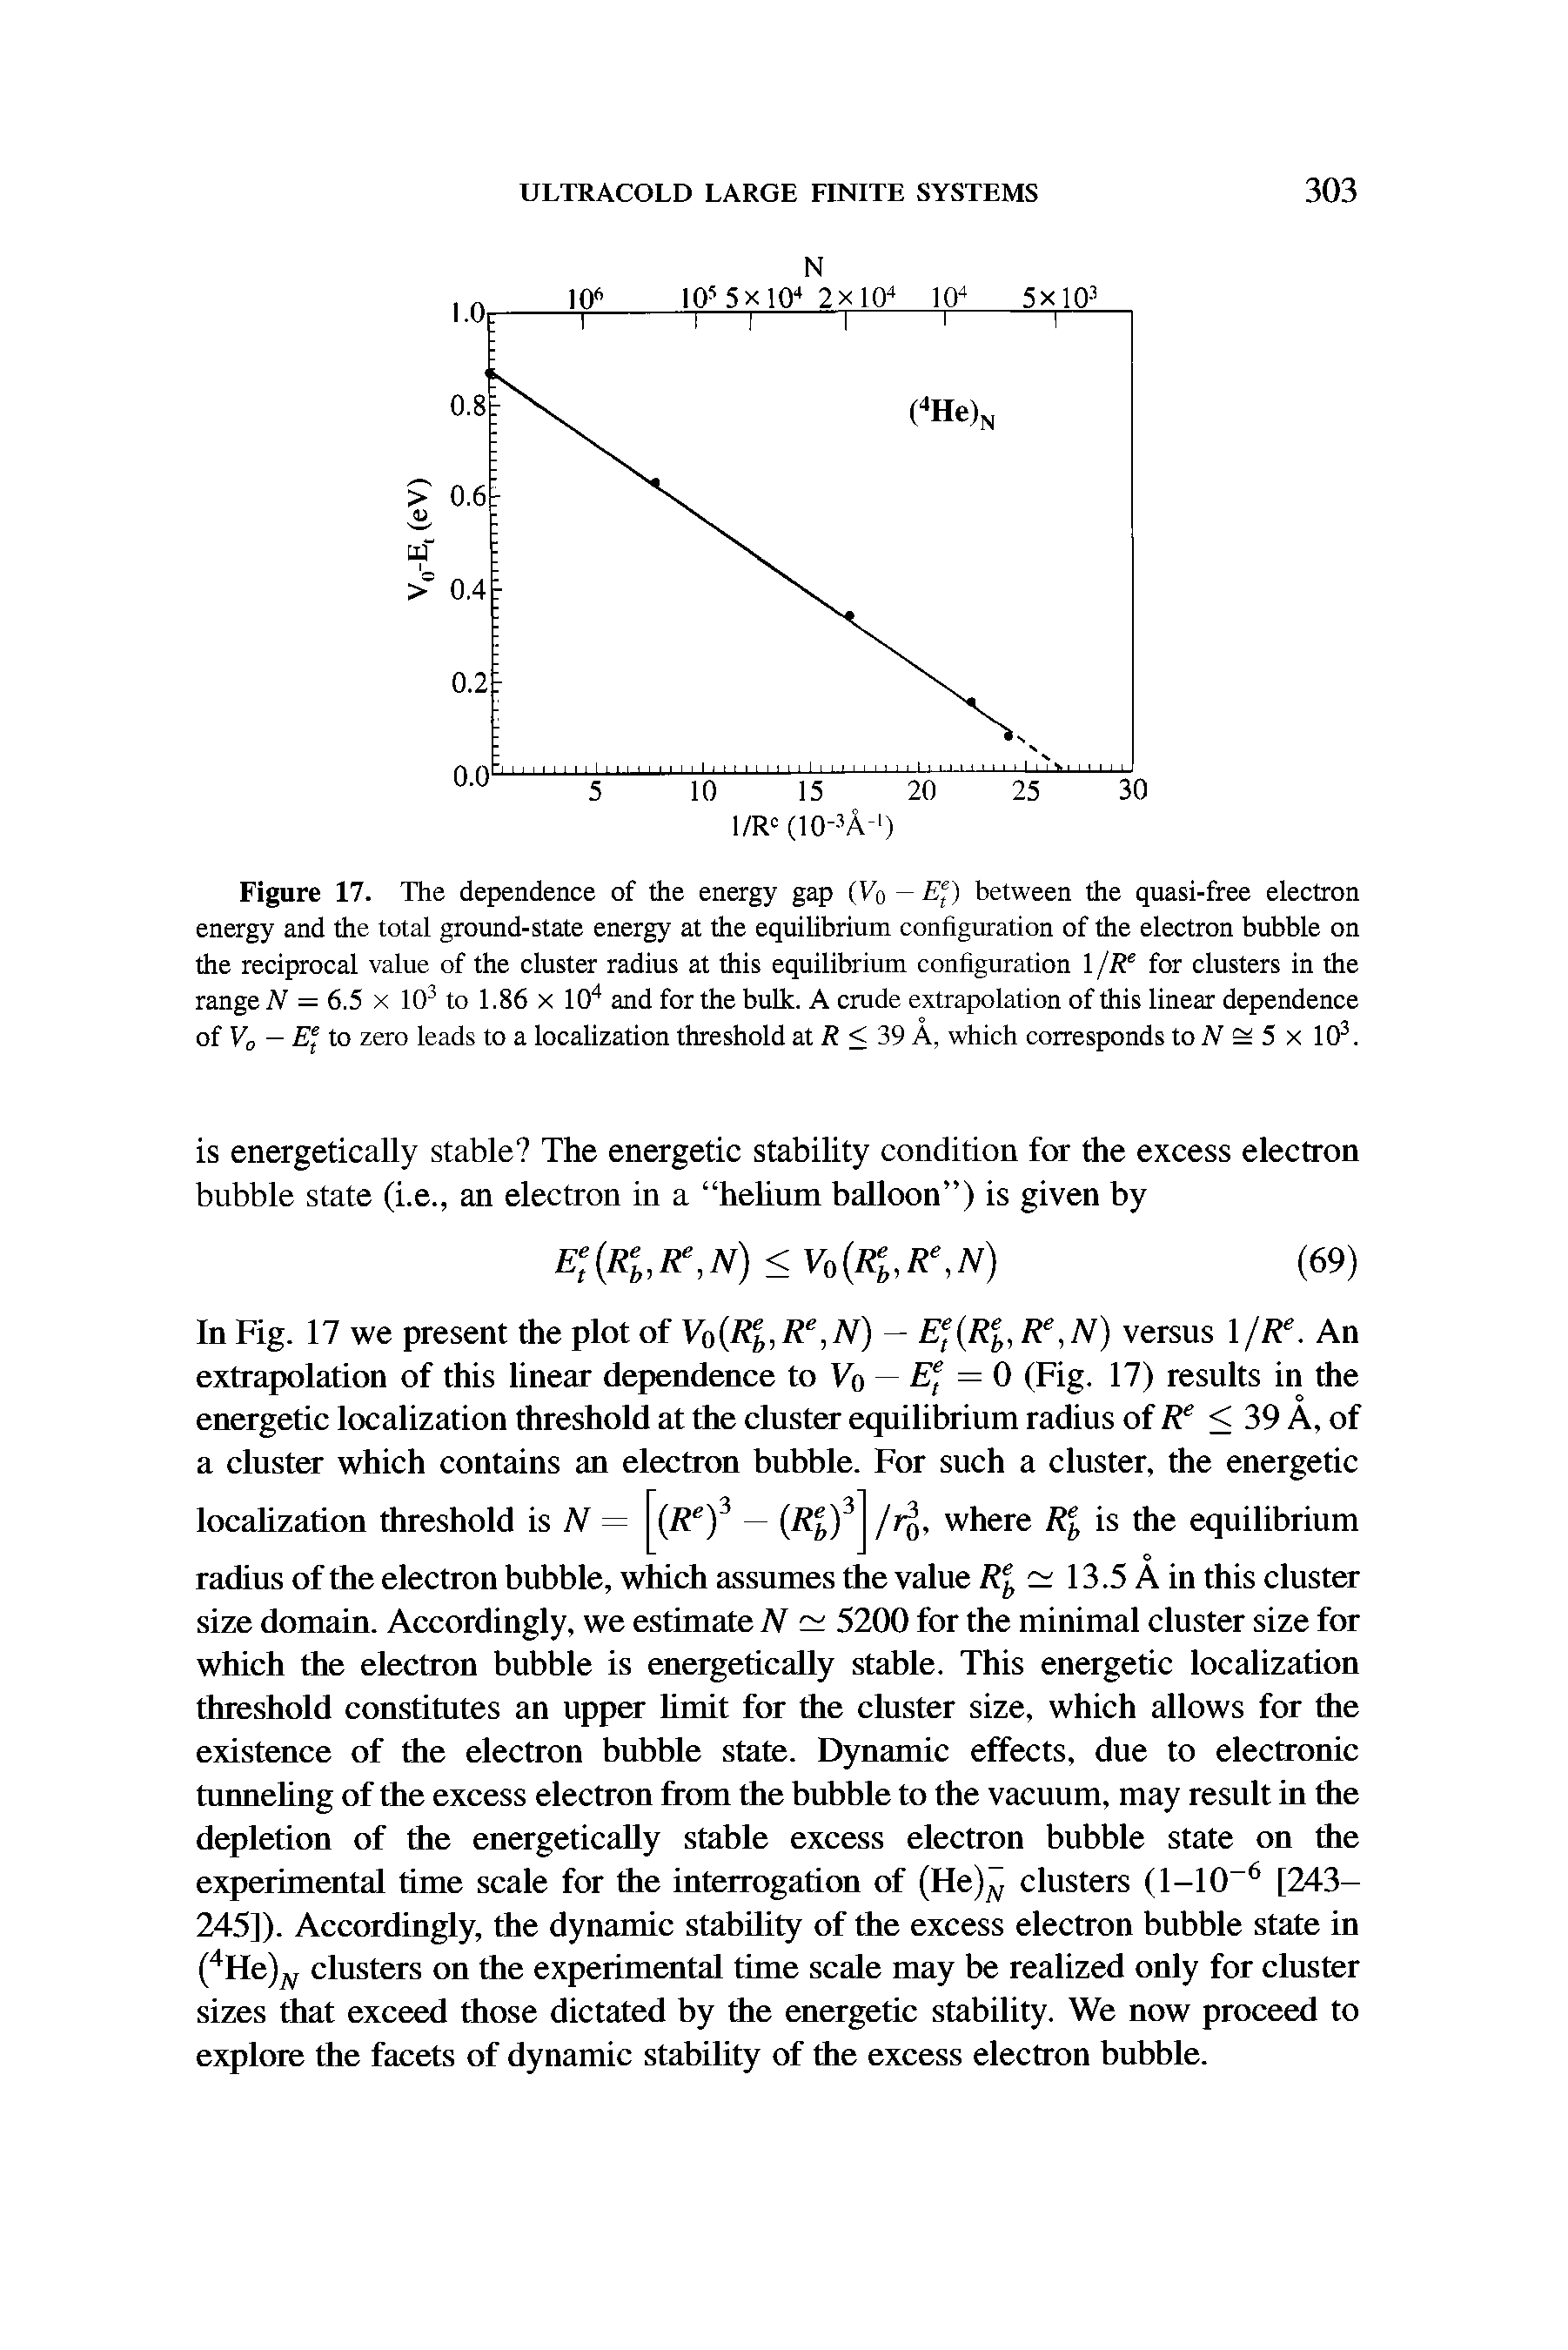 Figure 17. The dependence of the energy gap (To — Ef) between the quasi-free electron energy and the total ground-state energy at the equilibrium configuration of the electron bubble on the reciprocal value of the cluster radius at this equilibrium configuration 1 /B for clusters in the range N = 6.5 x 10 to 1.86 x 10 and for the bulk. A crude extrapolation of this linear dependence of Vo — E to zero leads to a localization threshold at 1 < 39 A, which corresponds to A = 5 x 10. ...